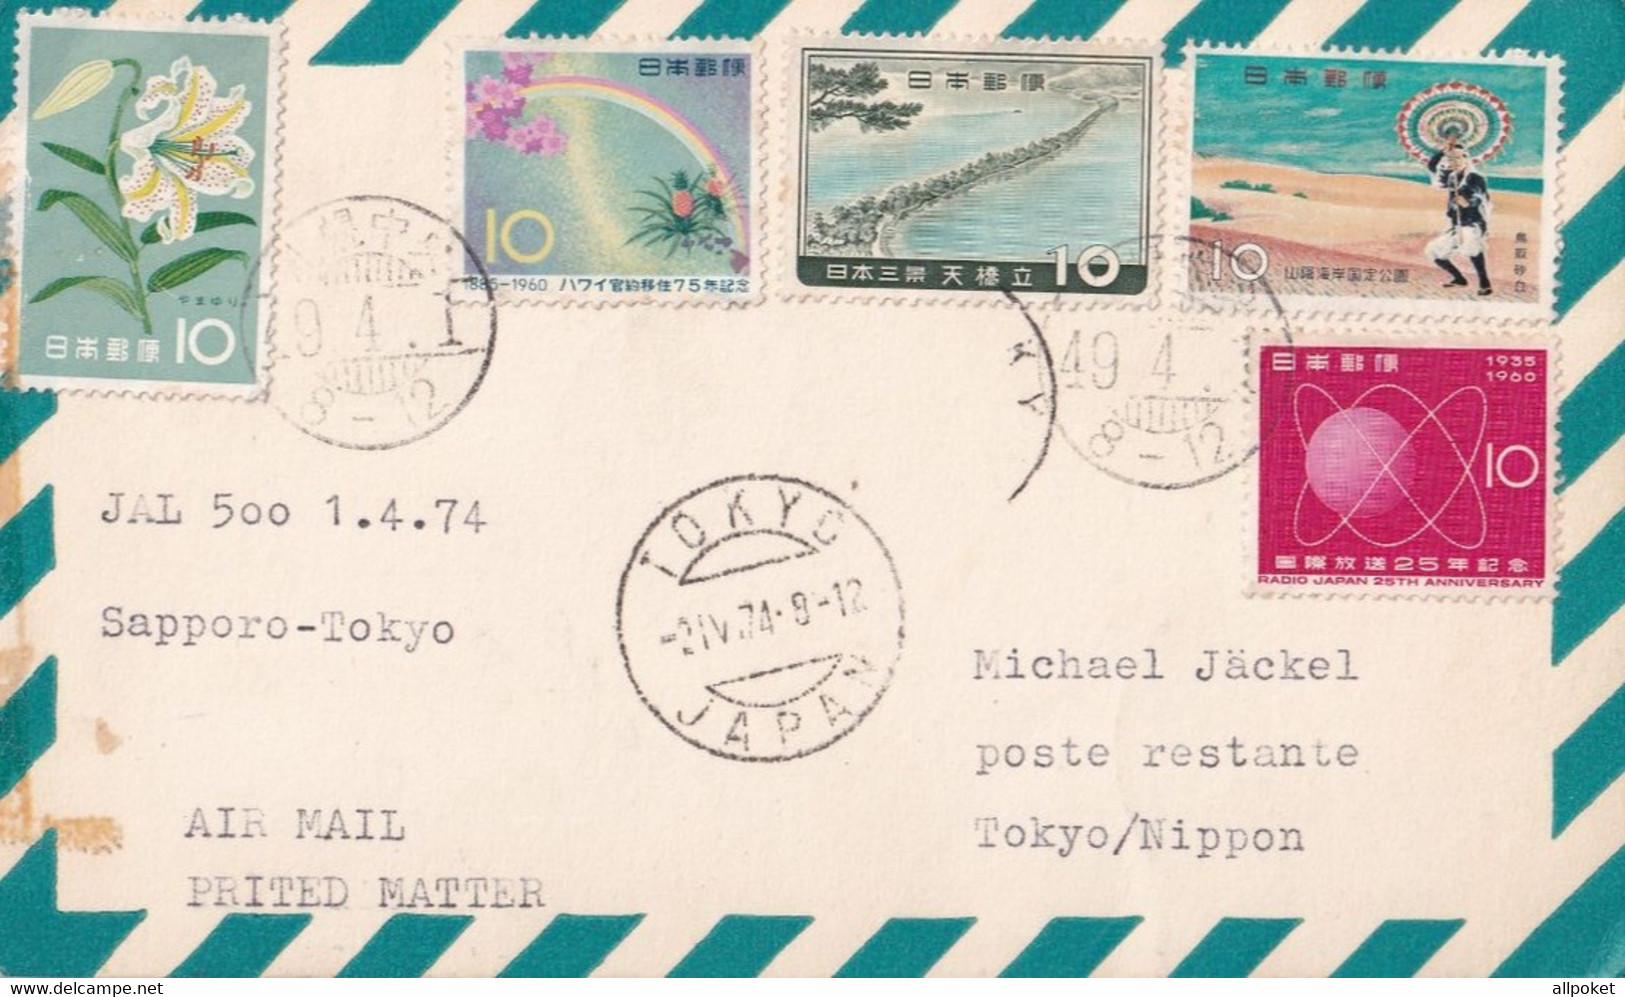 A14413 - TOKYO JAPAN STAMP SAPPORO TOKYO AIR MAIL - Covers & Documents